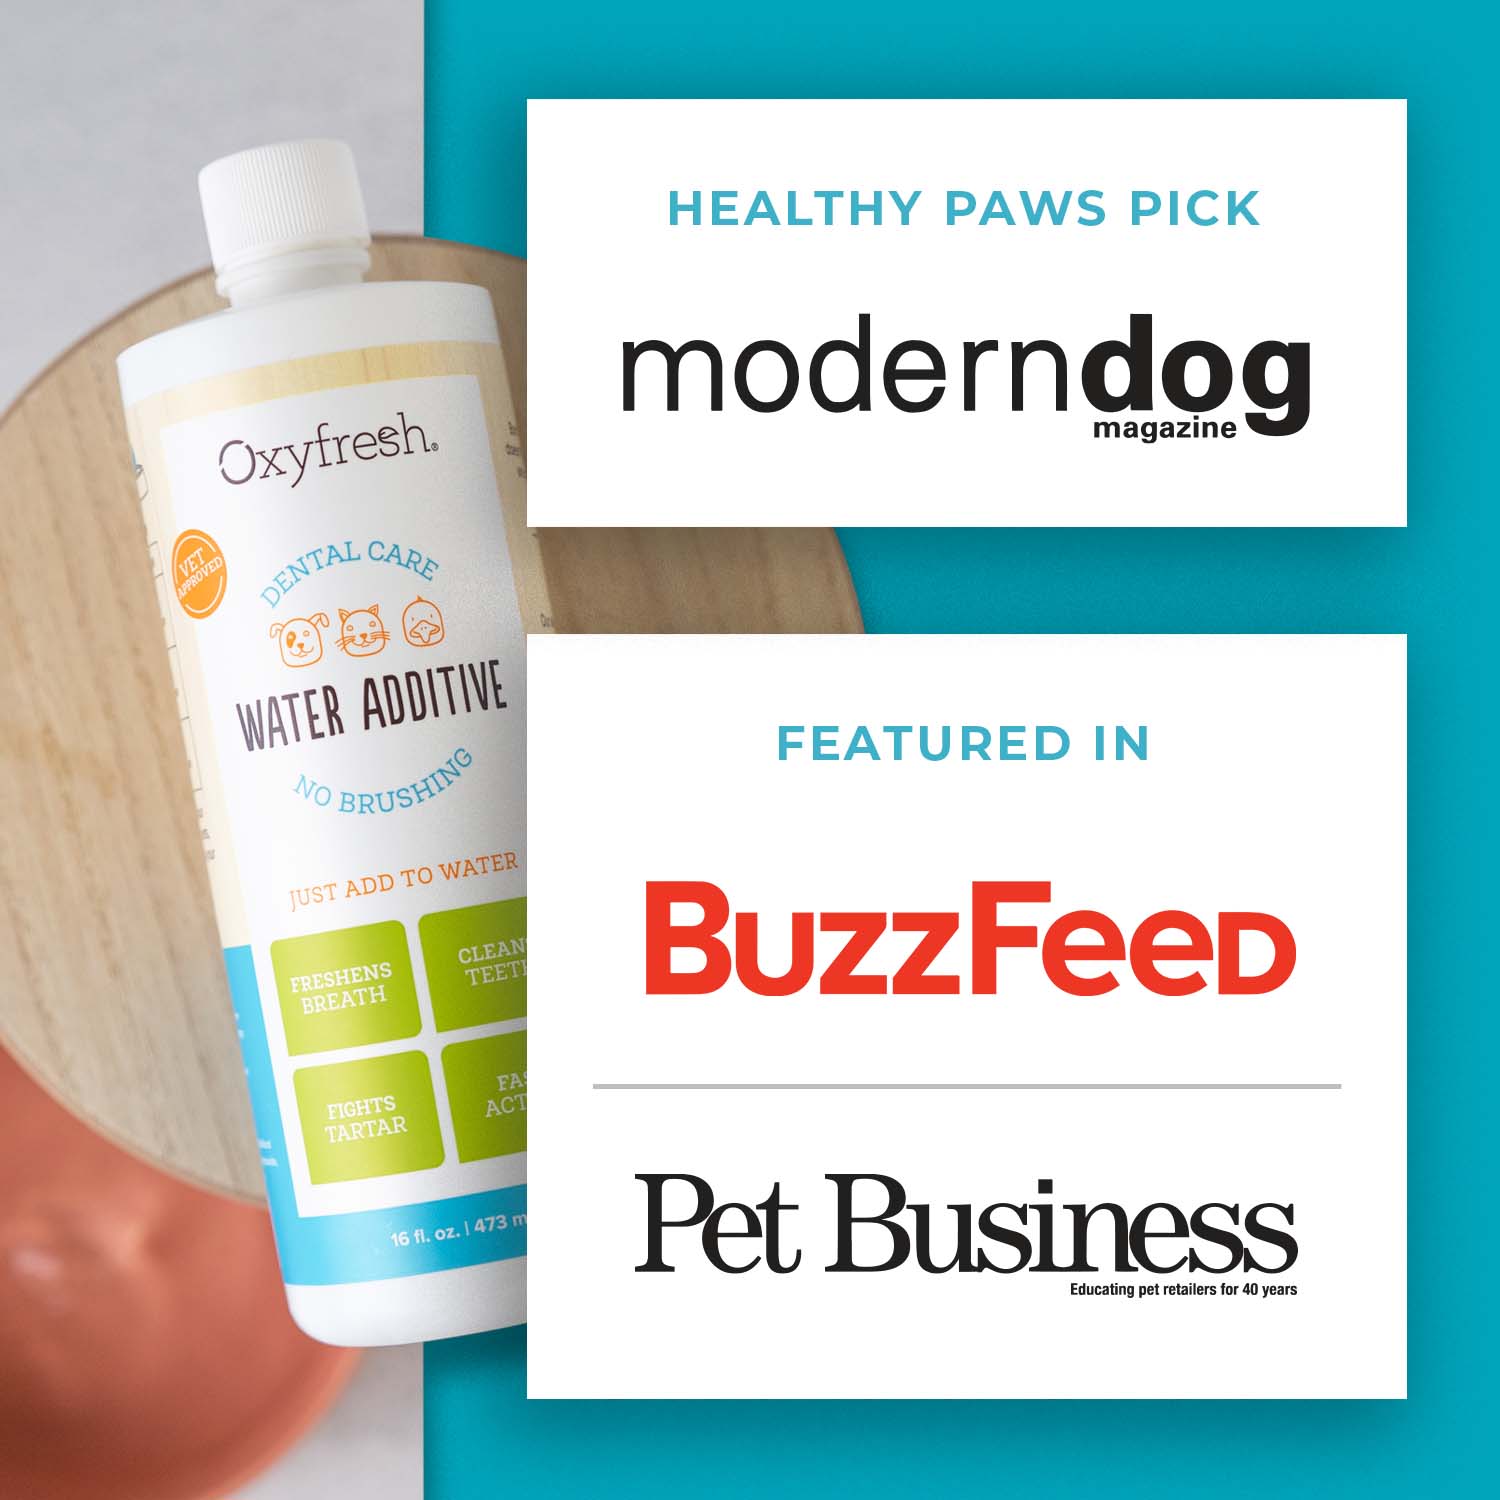 oxyfresh pet water additive with text overlay that says healthy paws pick at modern dog featured in buzzfeed and pet business